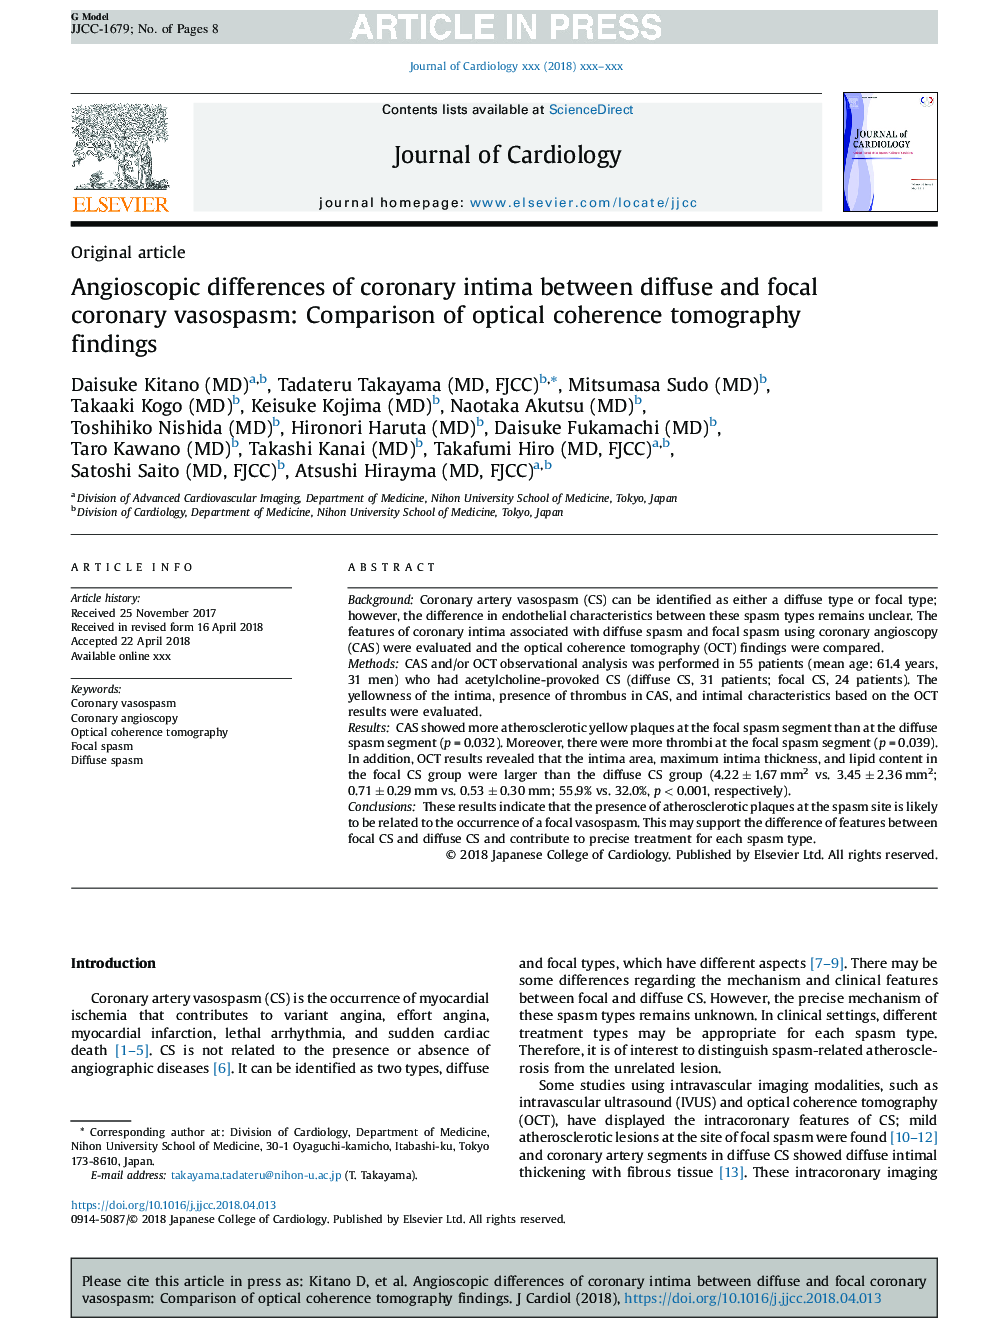 Angioscopic differences of coronary intima between diffuse and focal coronary vasospasm: Comparison of optical coherence tomography findings